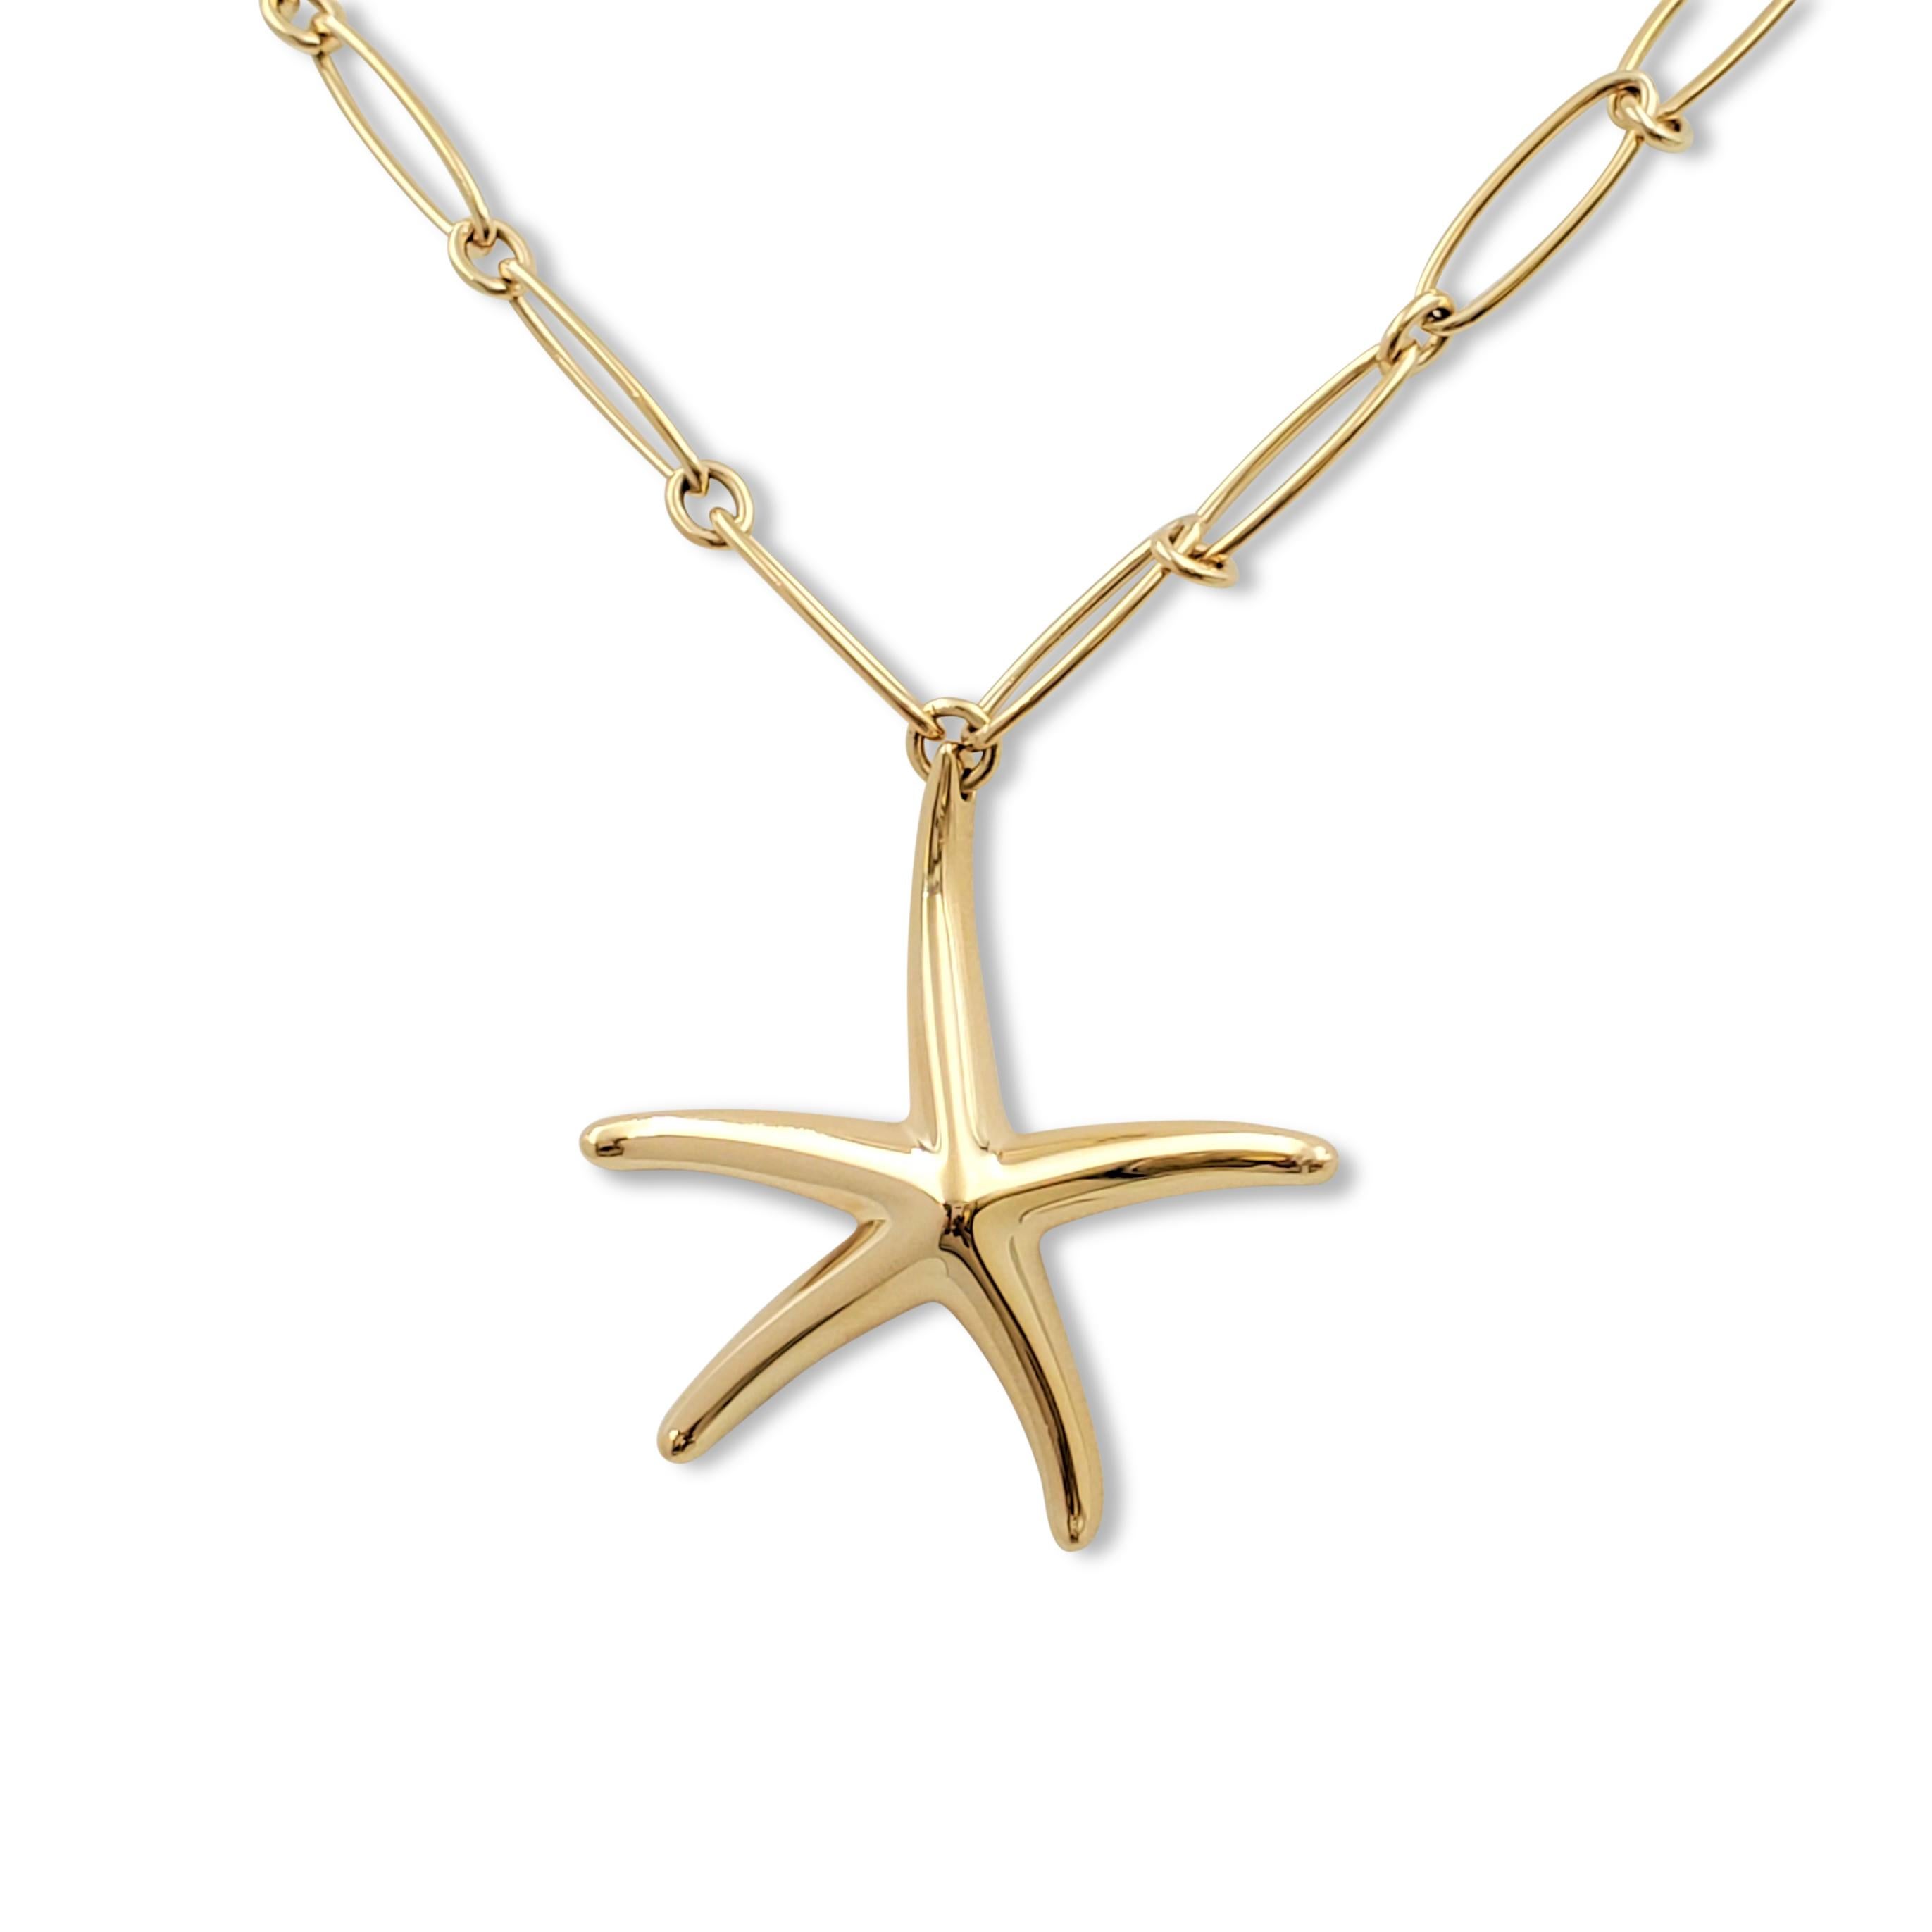 Authentic Elsa Peretti for Tiffany & Co. starfish pendant crafted in 18 karat yellow gold hangs from a link-style chain comprised of elongated oval links alternating with round jump ring spacer links. Signed Tiffany & Co., 750, Elsa Peretti. The